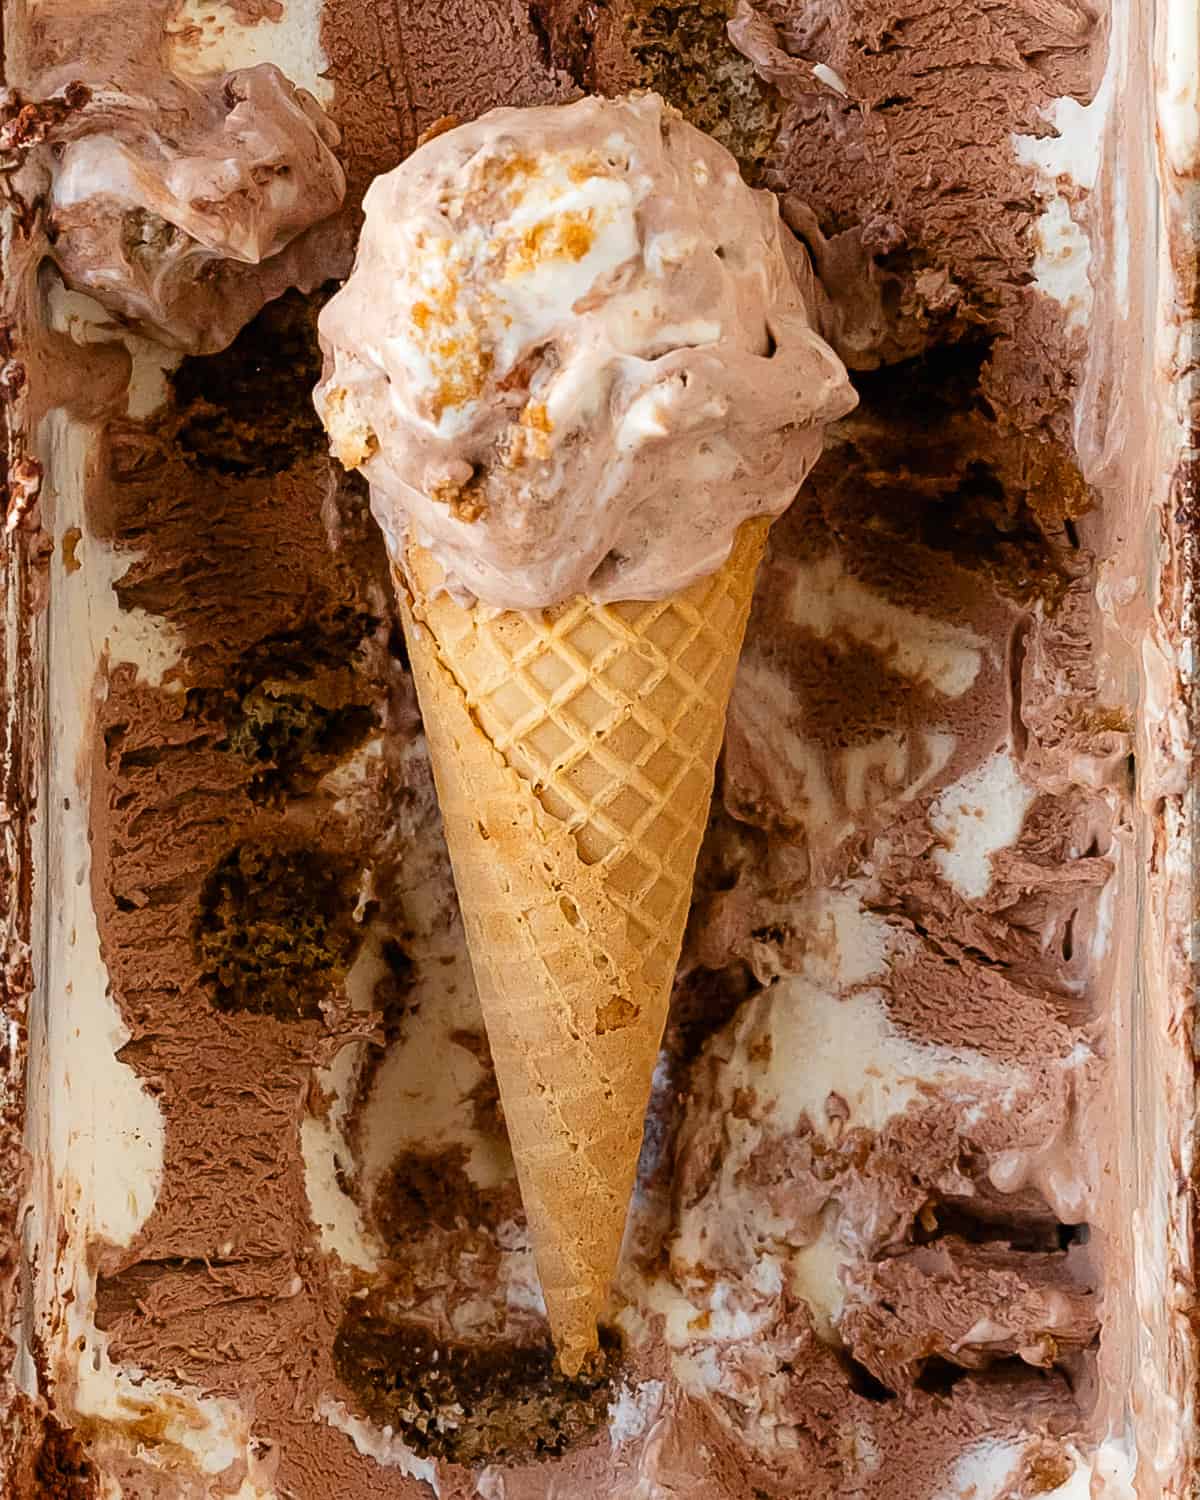 Tiramisu ice cream is an rich, sweet and creamy, coffee infused mascarpone ice cream filled with pieces of espresso soaked ladyfingers and is topped with a dusting of cocoa powder. Learn how to make this no churn ice cream inspired by the classic Italian dessert in a few easy steps with just a handful of ingredients.